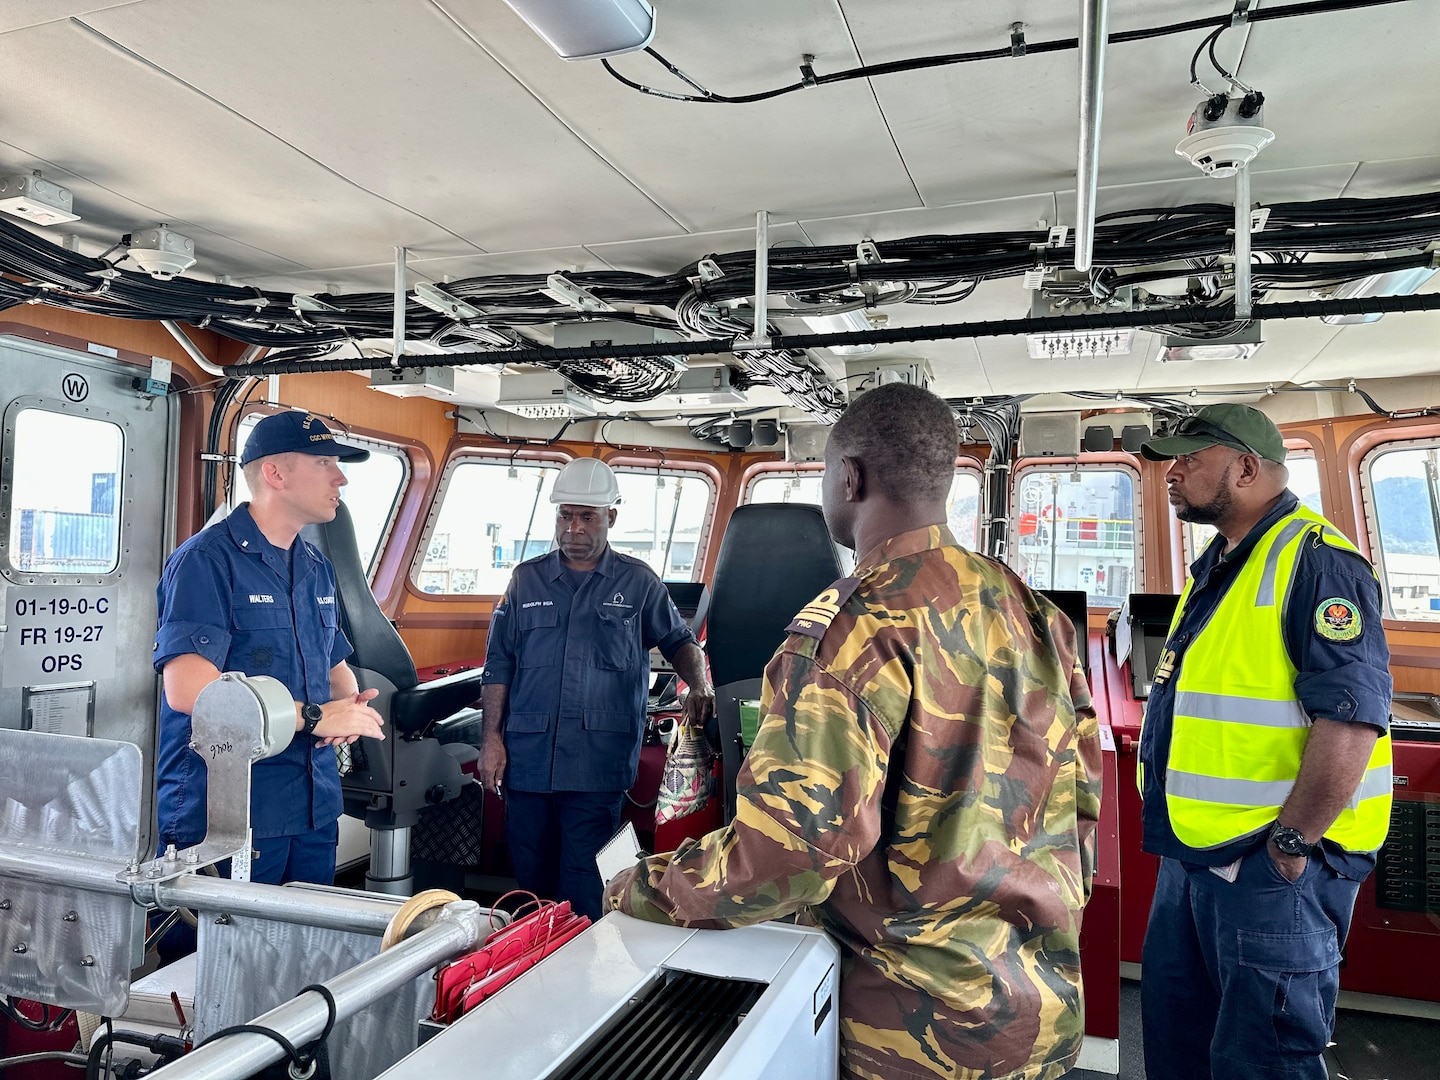 USCGC Myrtle Hazard (WPC 1139) hosts operational planning and subject matter exchange with partners in Port Moresby, Papua New Guinea on Aug. 22, 2023. The U.S. Coast Guard is in Papua New Guinea at the invitation of the PNG government to join their lead in maritime operations to combat illegal fishing and safeguard maritime resources following the recent signing and ratification of the bilateral agreement between the United States and Papua New Guinea. (U.S. Coast Guard photo by Chief Warrant Officer Sara Muir)